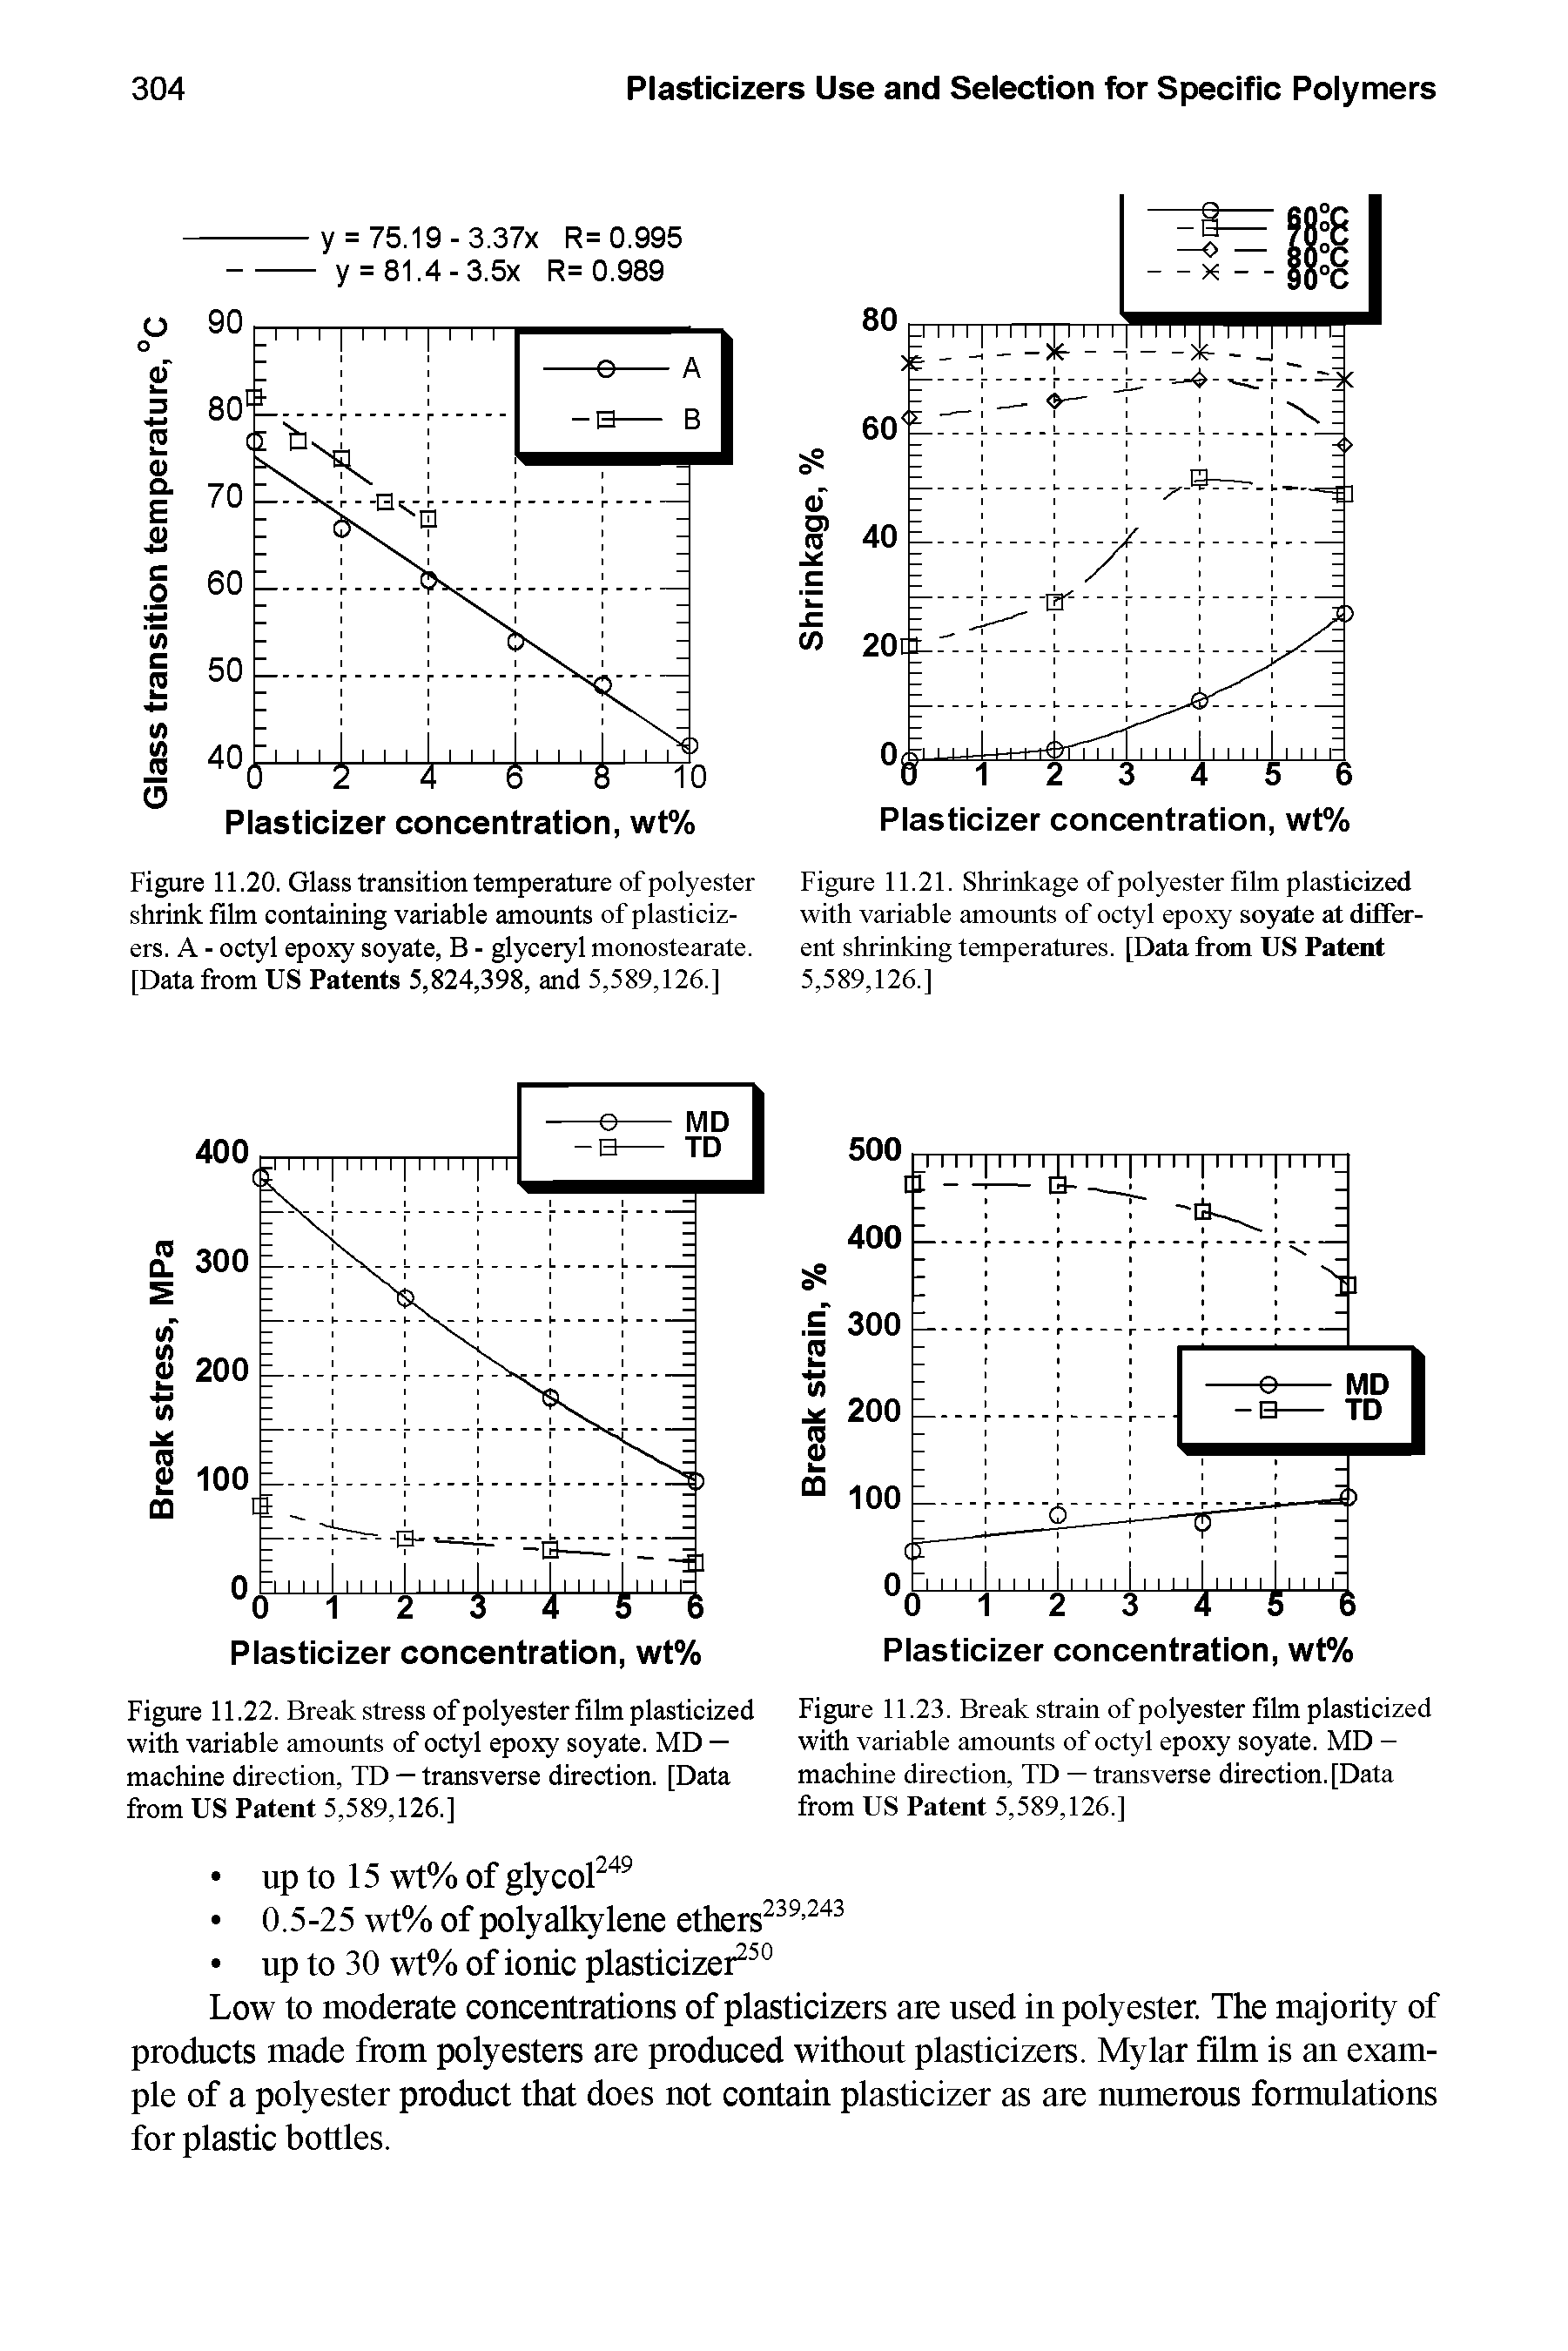 Figure 11.21. Shrinkage of polyester film plasticized with variable amounts of octyl epoxy soyate at different shrinking temperatures. [Data from US Patent 5,589,126.]...